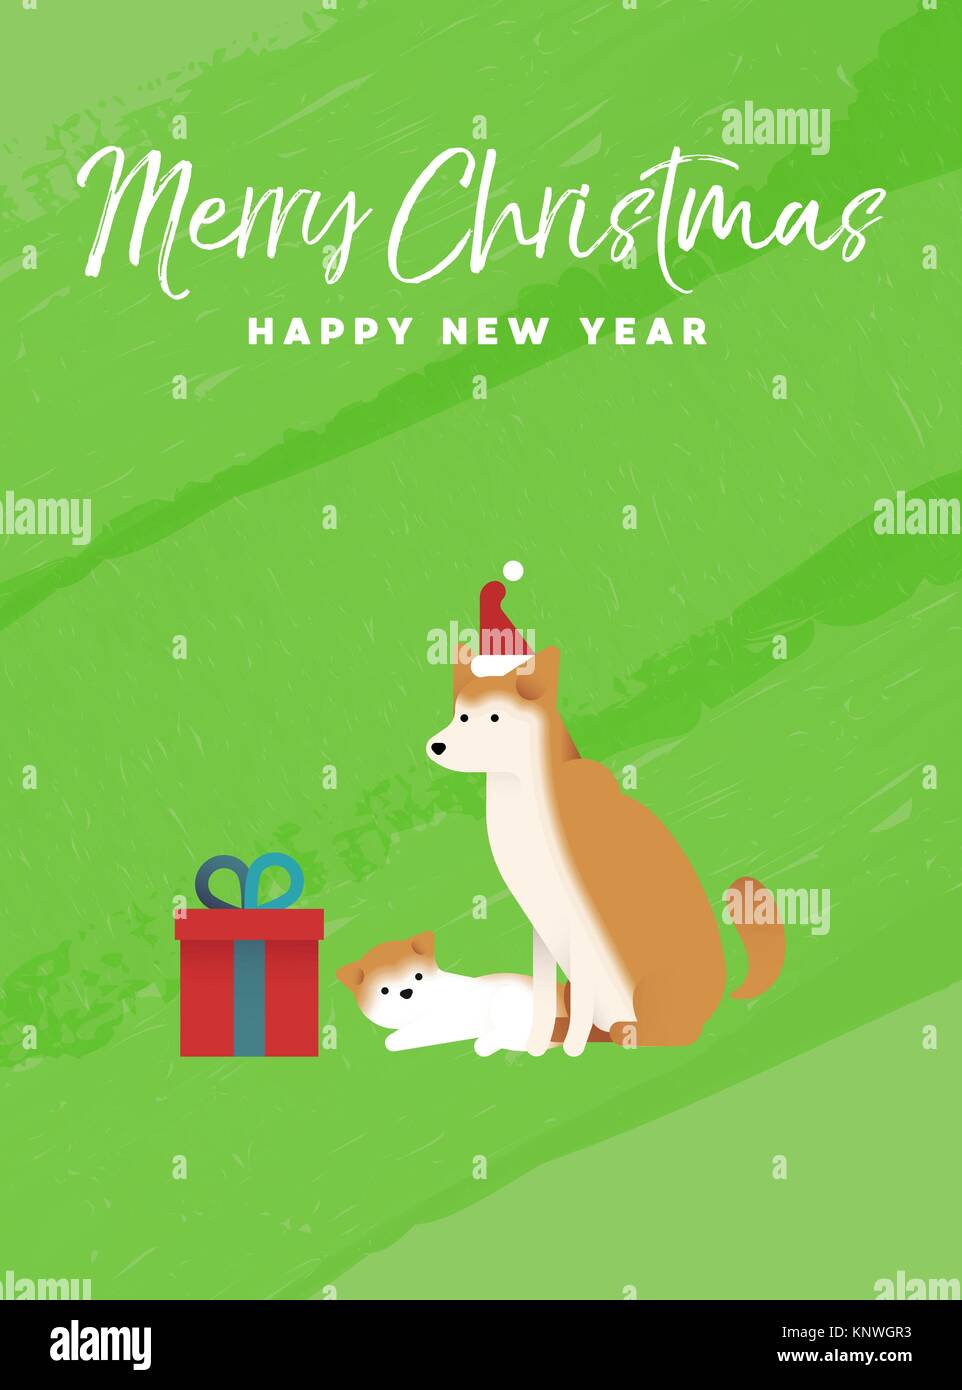 Merry Christmas and Happy New Year holiday greeting card illustration. Shiba inu dog and puppy on colorful texture background. EPS10 vector. Stock Vector